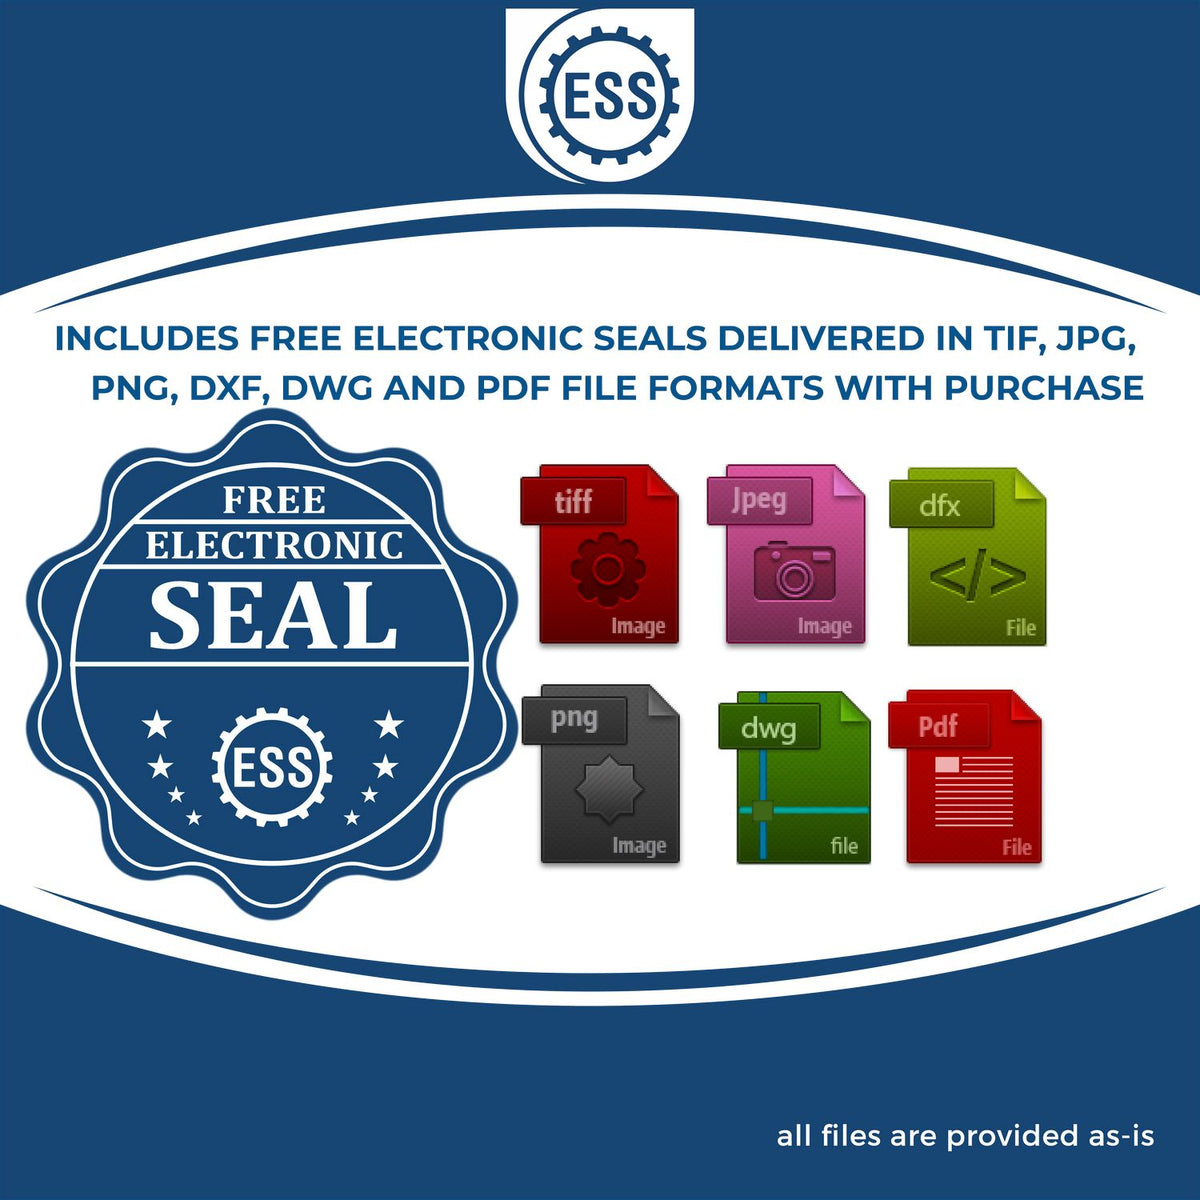 An infographic for the free electronic seal for the Slim Pre-Inked Arizona Professional Engineer Seal Stamp illustrating the different file type icons such as DXF, DWG, TIF, JPG and PNG.